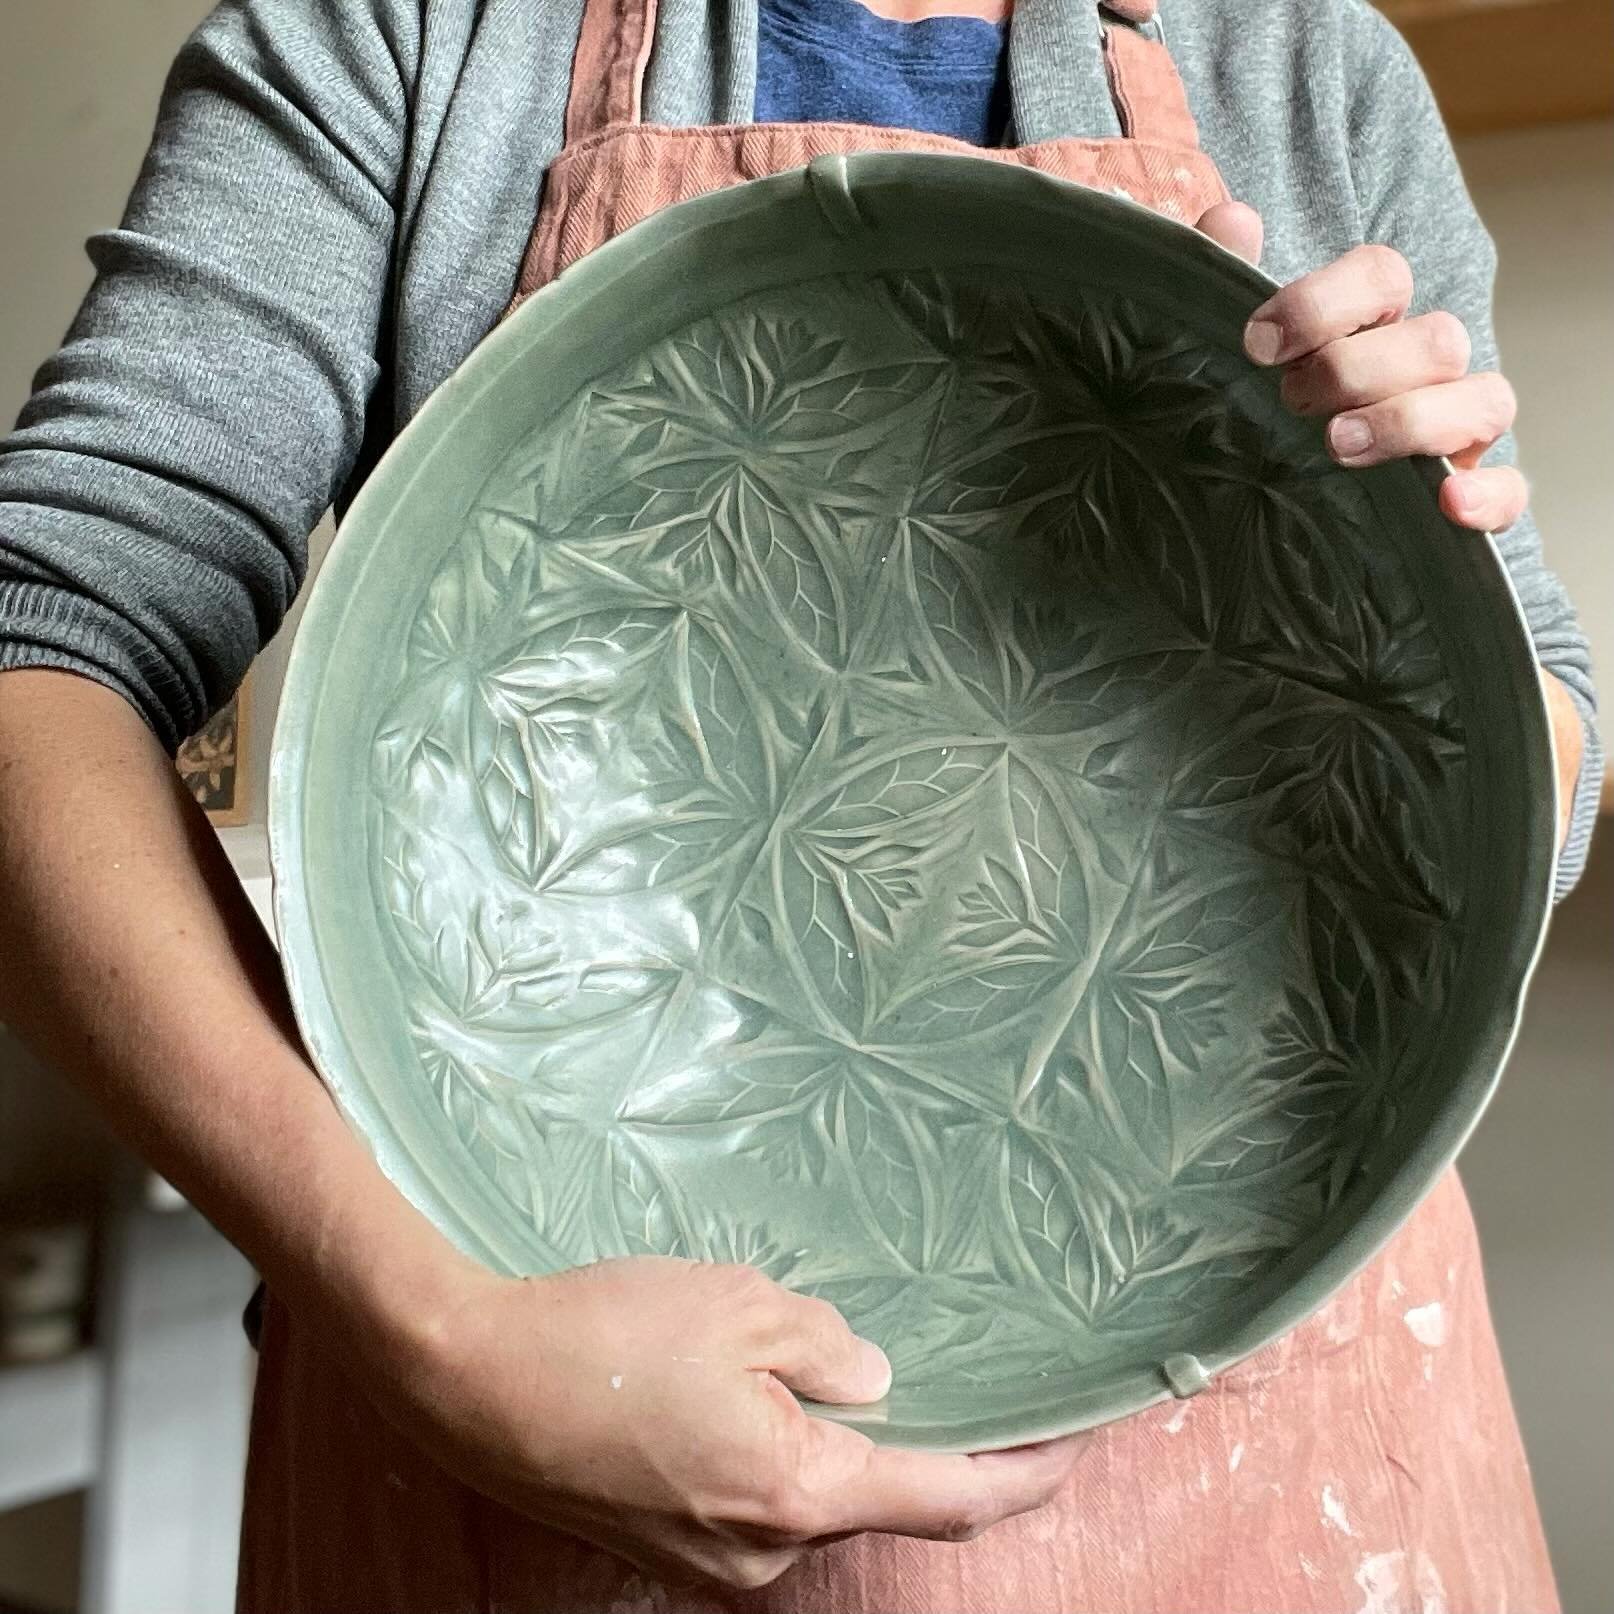 This salad bowl is heading to a Nelson home.  I hope it will be filled with massive Caesar salads to accompany the best lasagnas ever&hellip;served up after a day on the lake&hellip;⛵️ It almost sounds like I&rsquo;m fishing for a dinner invitation;)